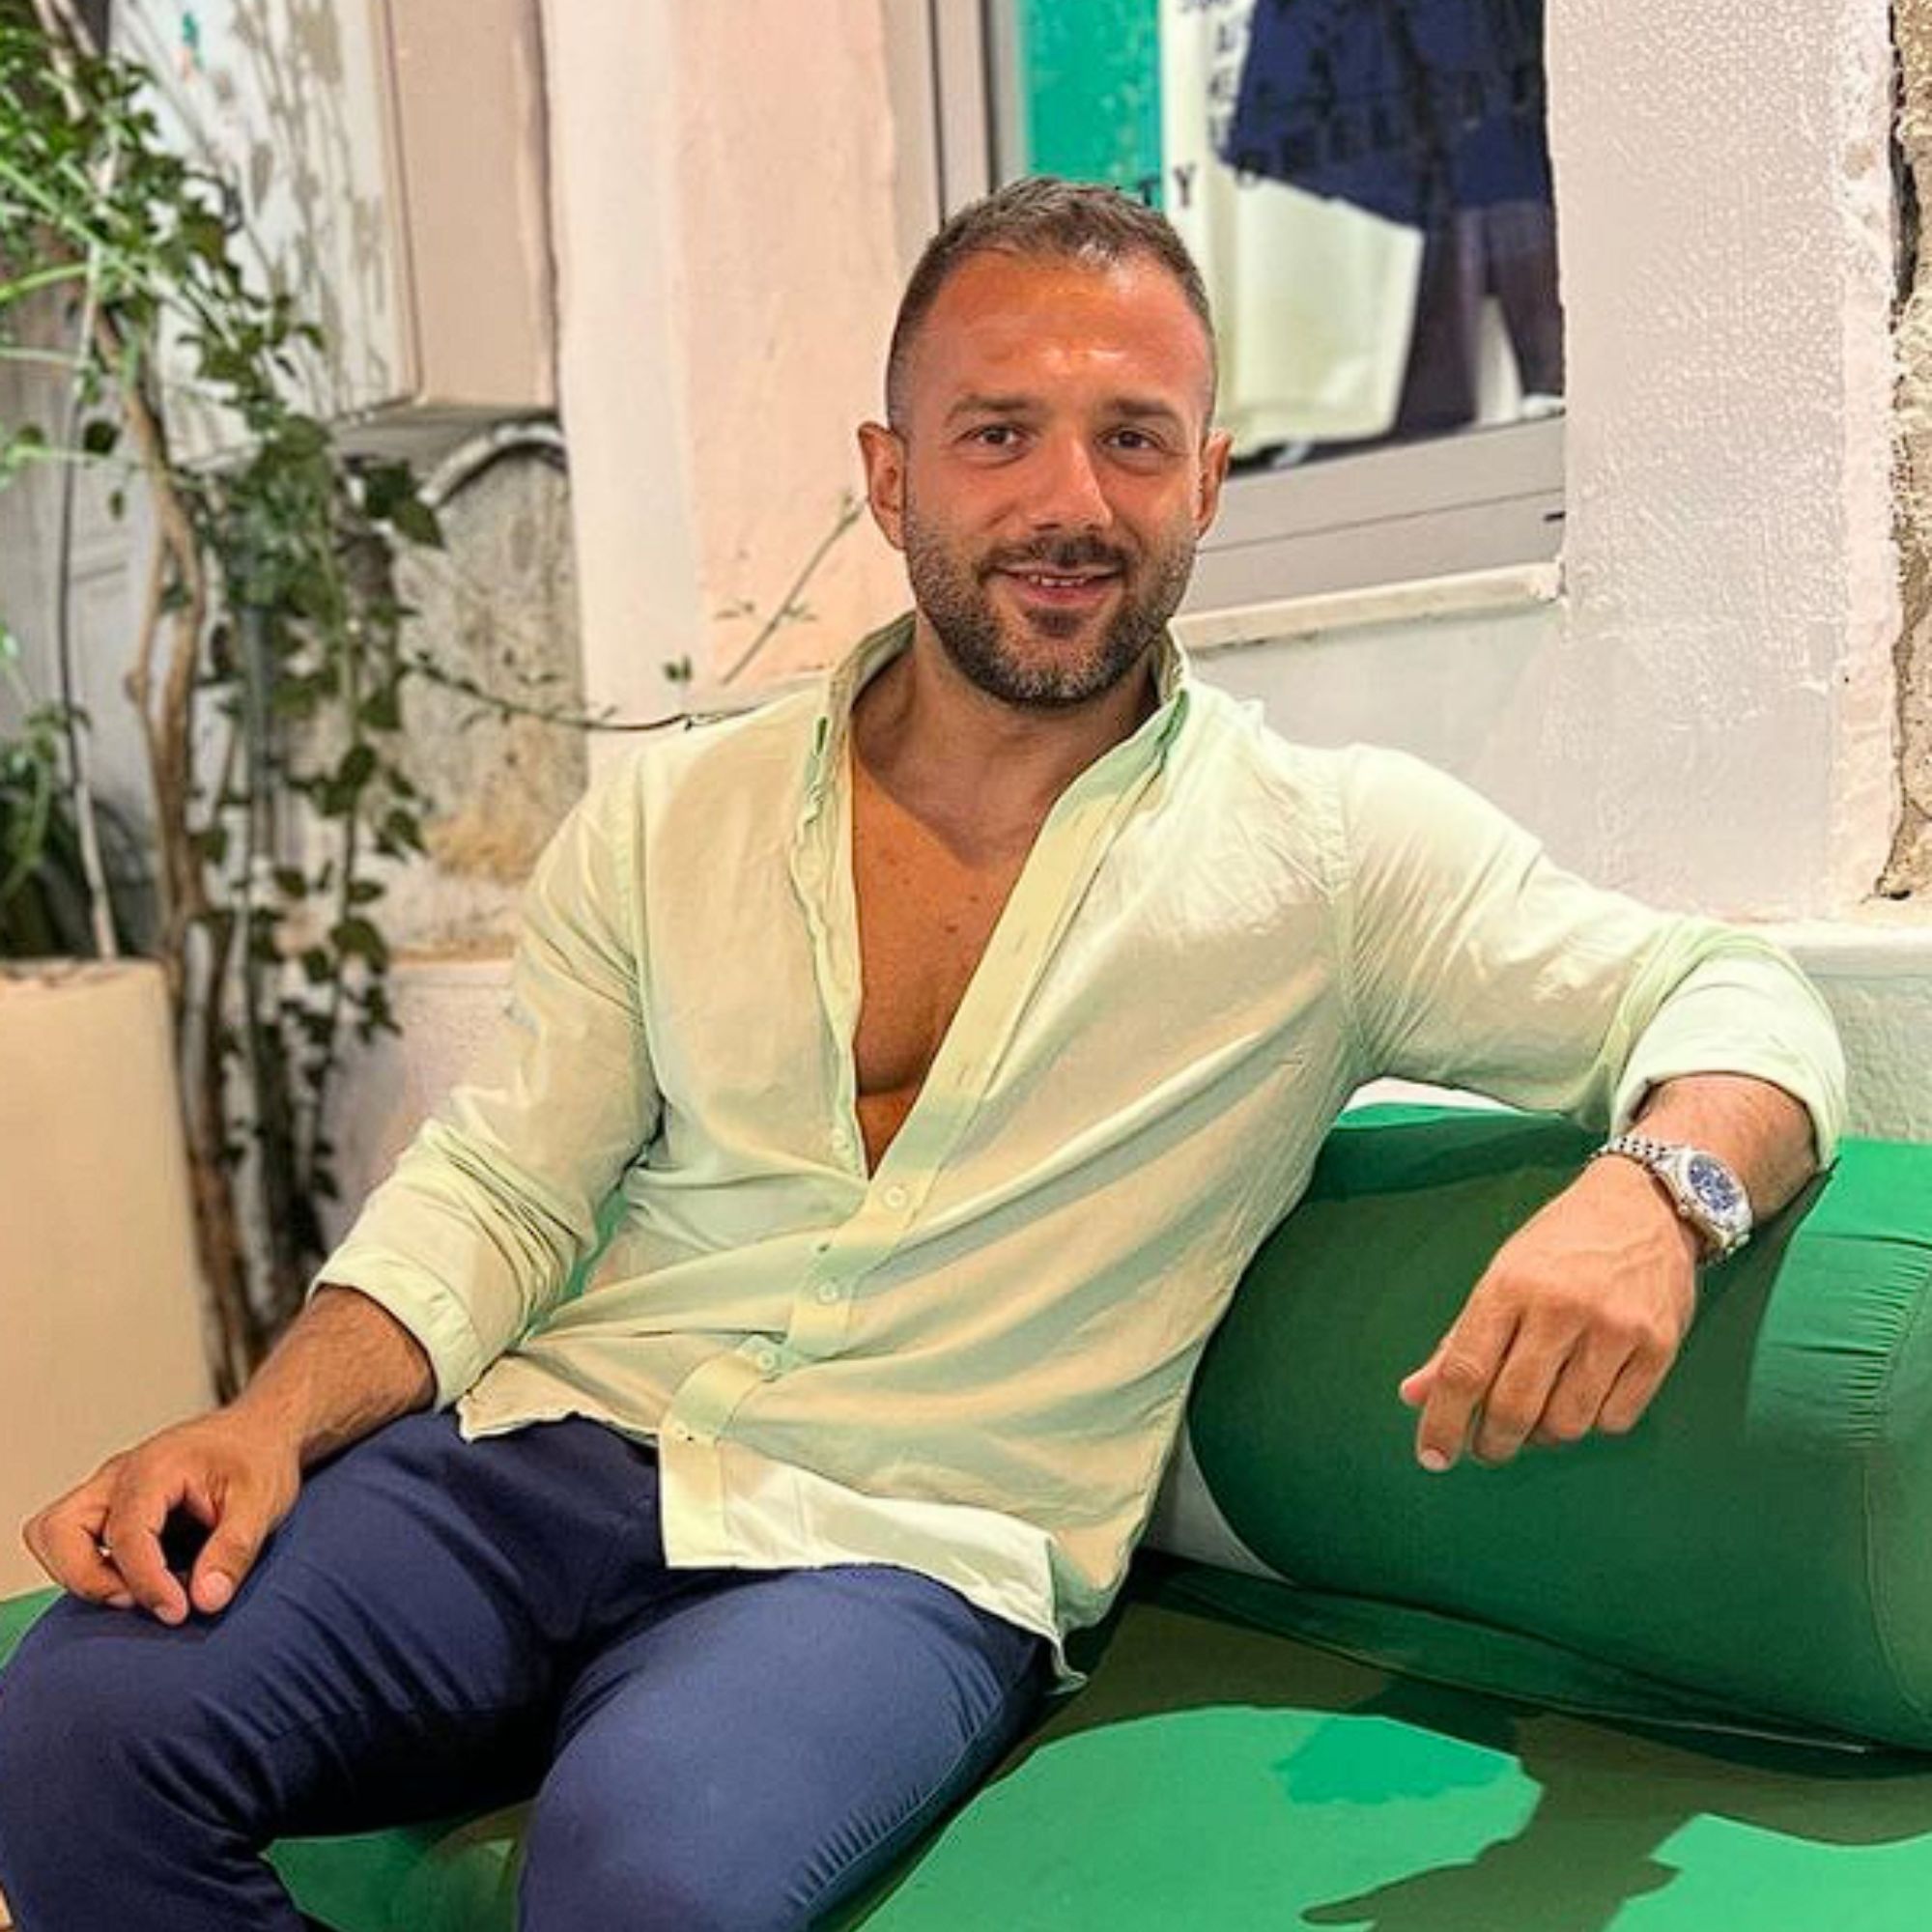 A picture of Seymen Usta, a man wearing a white shirt and blue trousers, sitting on a green couch